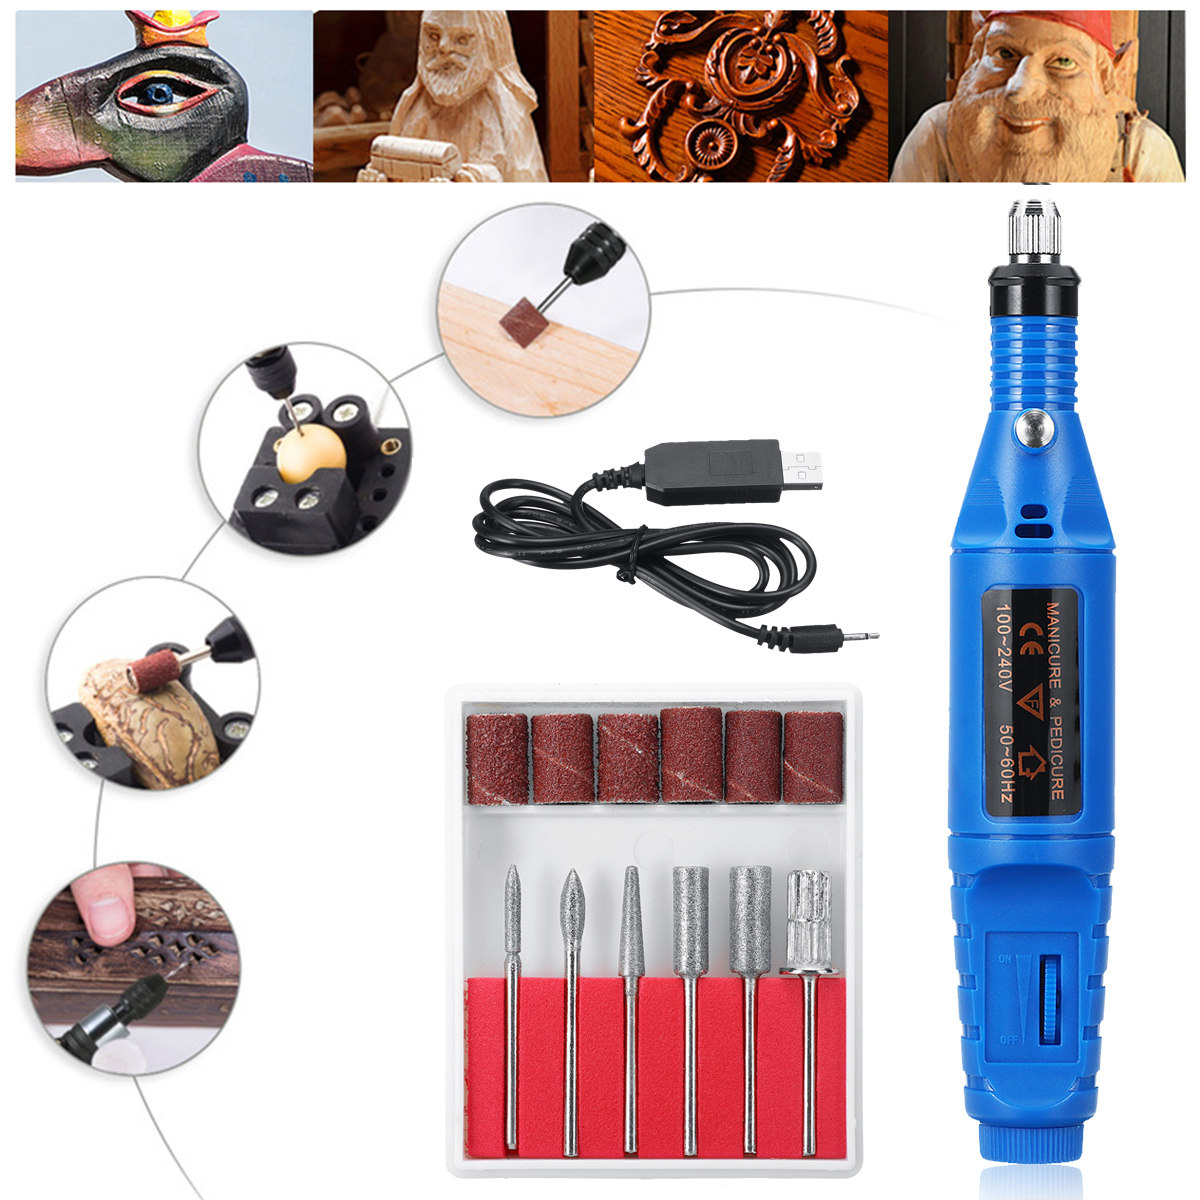 USB-Mini-Electric-Grinder-Engraving-Pen-Milling-Rotary-Drill-Grinder-Tool-Milling-Polishing-Drilling-1442450-6